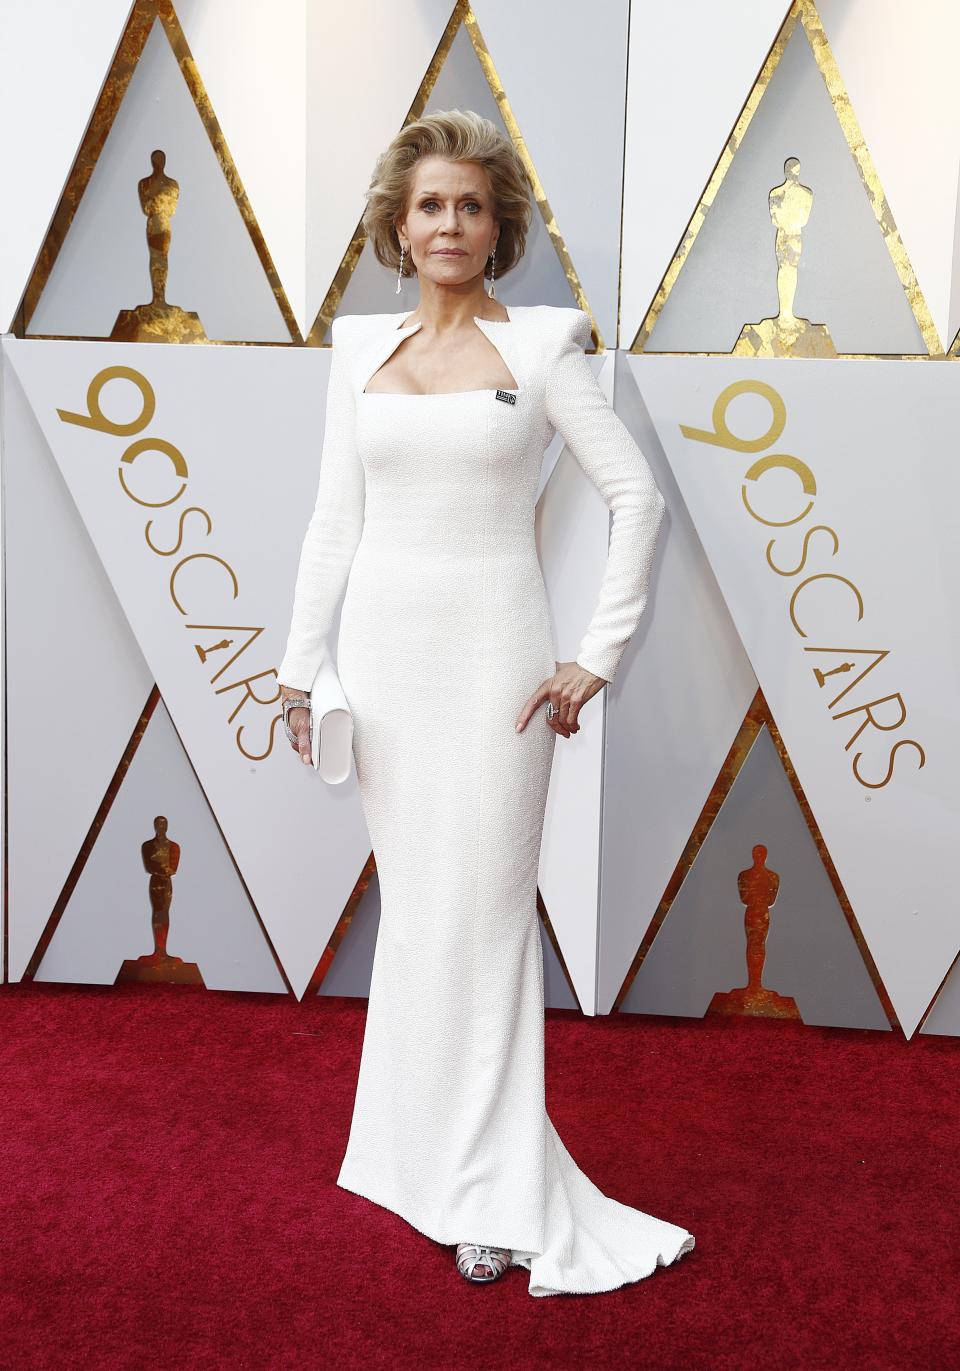 MCX123. Hollywood (United States), 04/03/2018.- Jane Fonda arrives for the 90th annual Academy Awards ceremony at the Dolby Theatre in Hollywood, California, USA, 04 March 2018. The Oscars are presented for outstanding individual or collective efforts in 24 categories in filmmaking. (Estados Unidos) EFE/EPA/MIKE NELSON